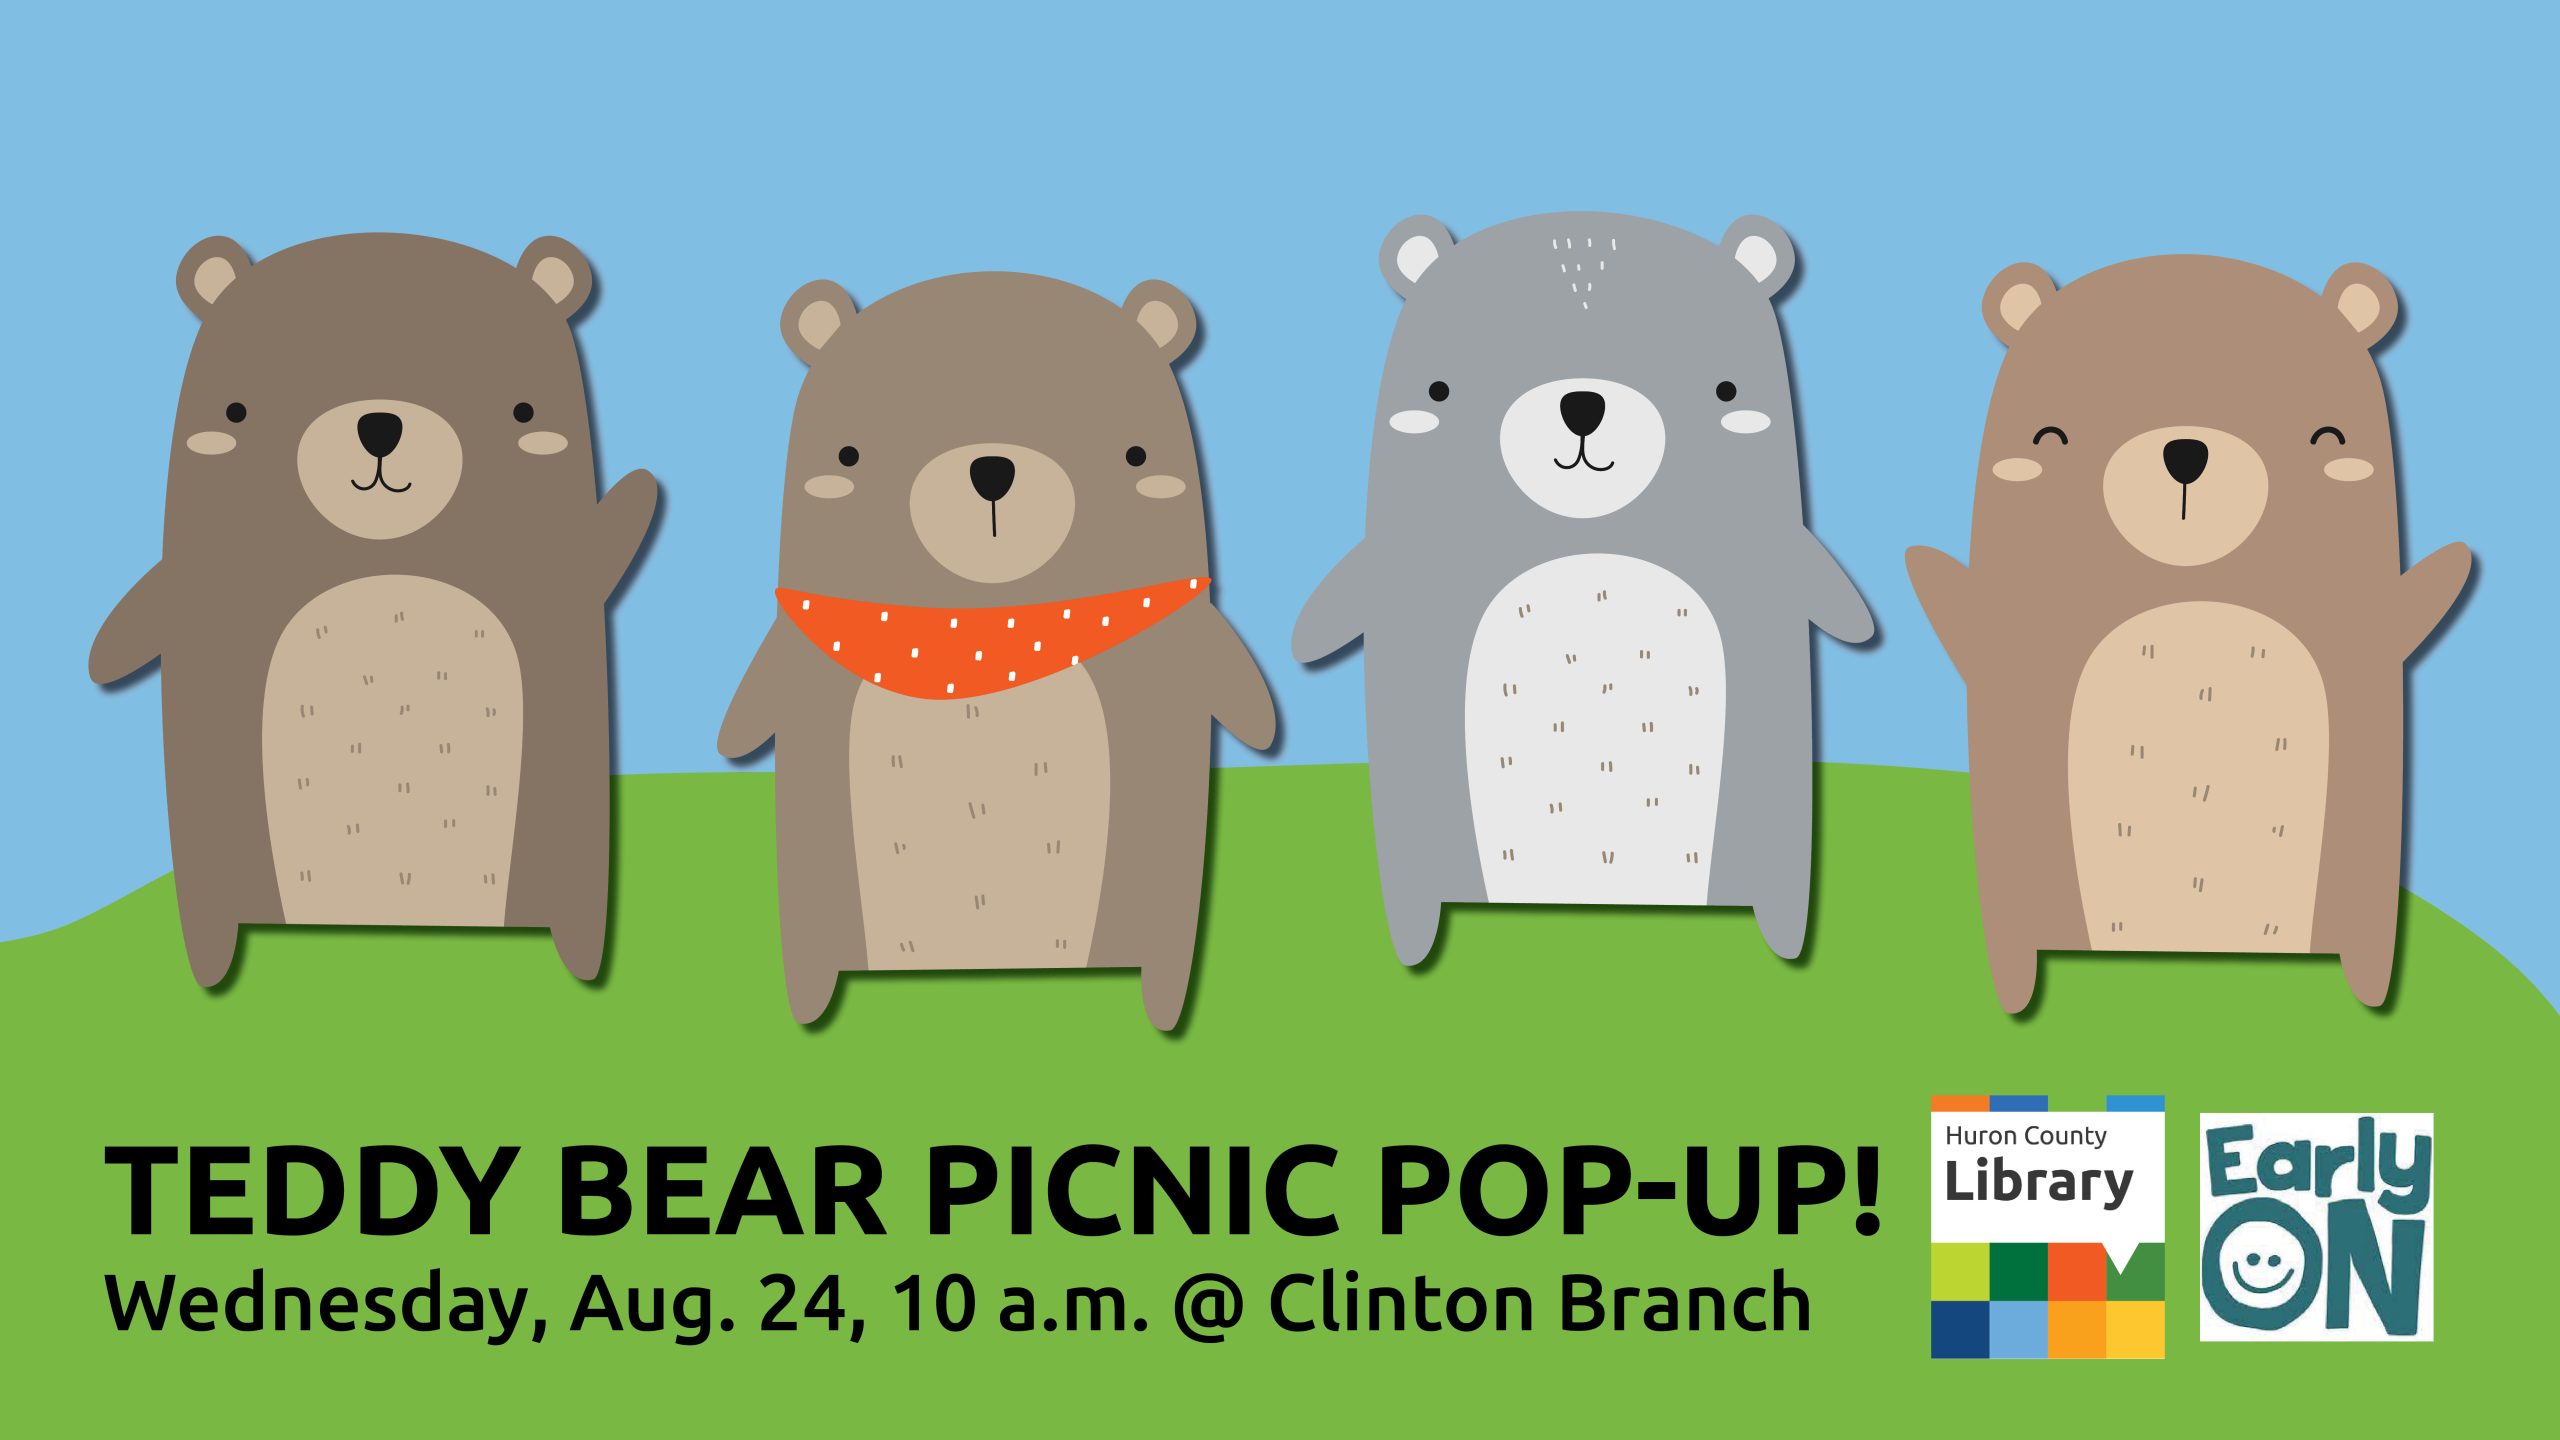 Illustration of four teddy bears on grass with text promoting Teddy Bear Picnic Pop-up